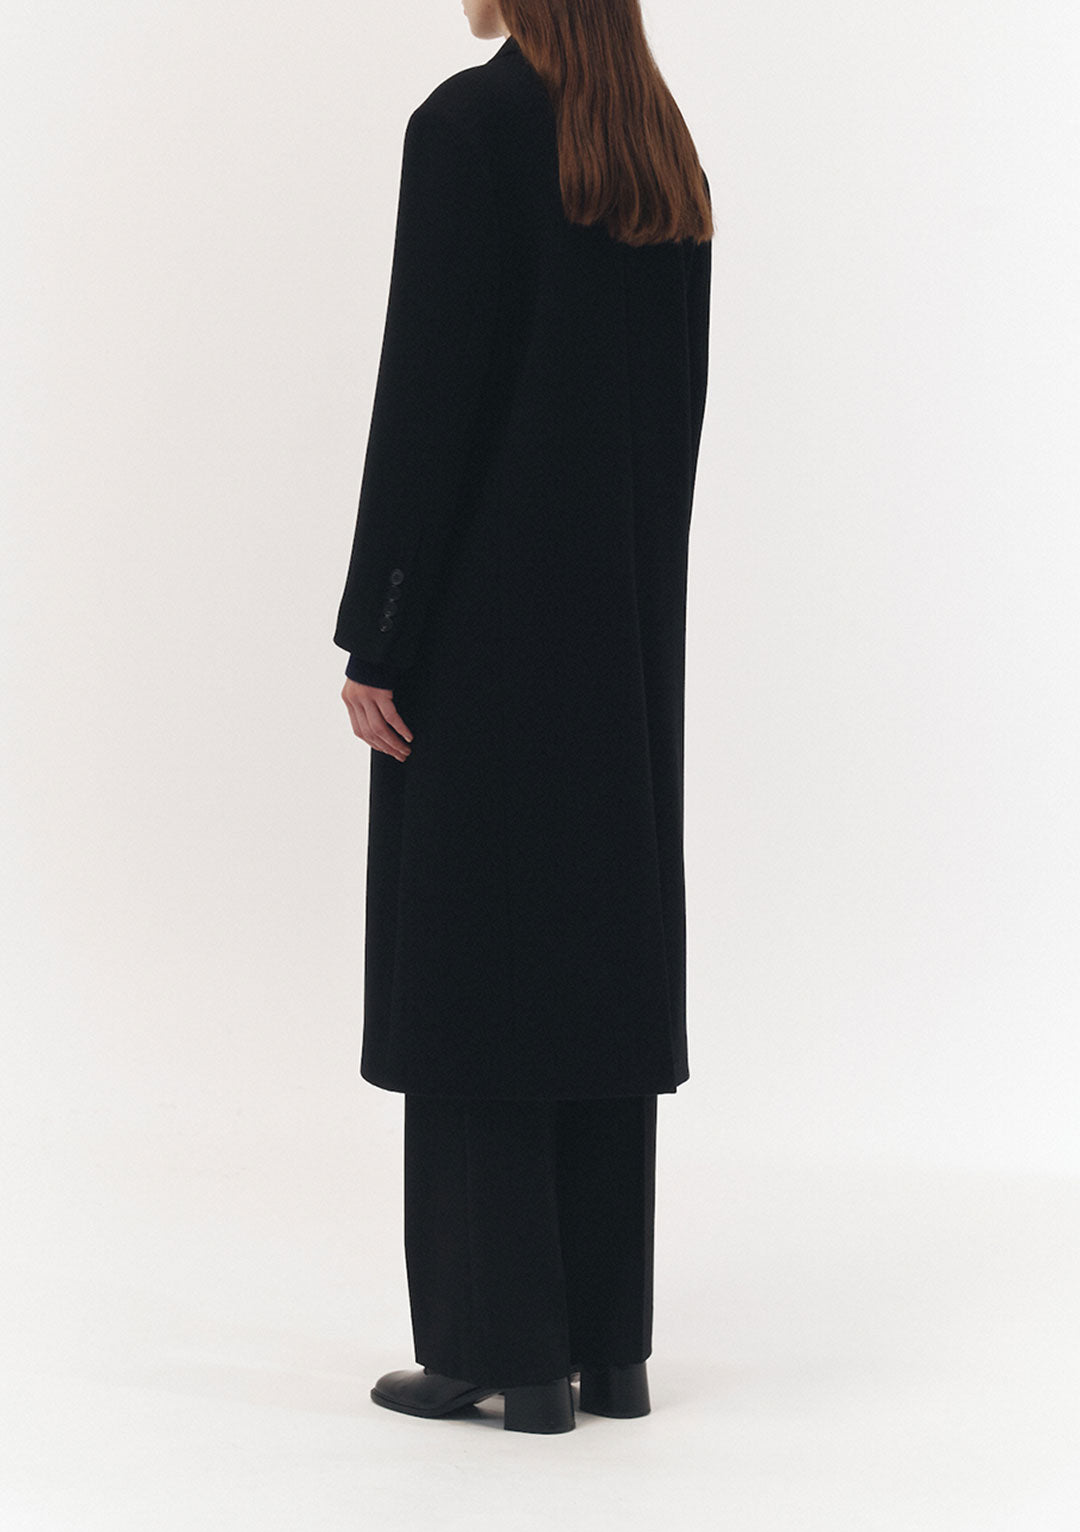 DUNST Unisex Tailored Double-Breasted Wool Coat